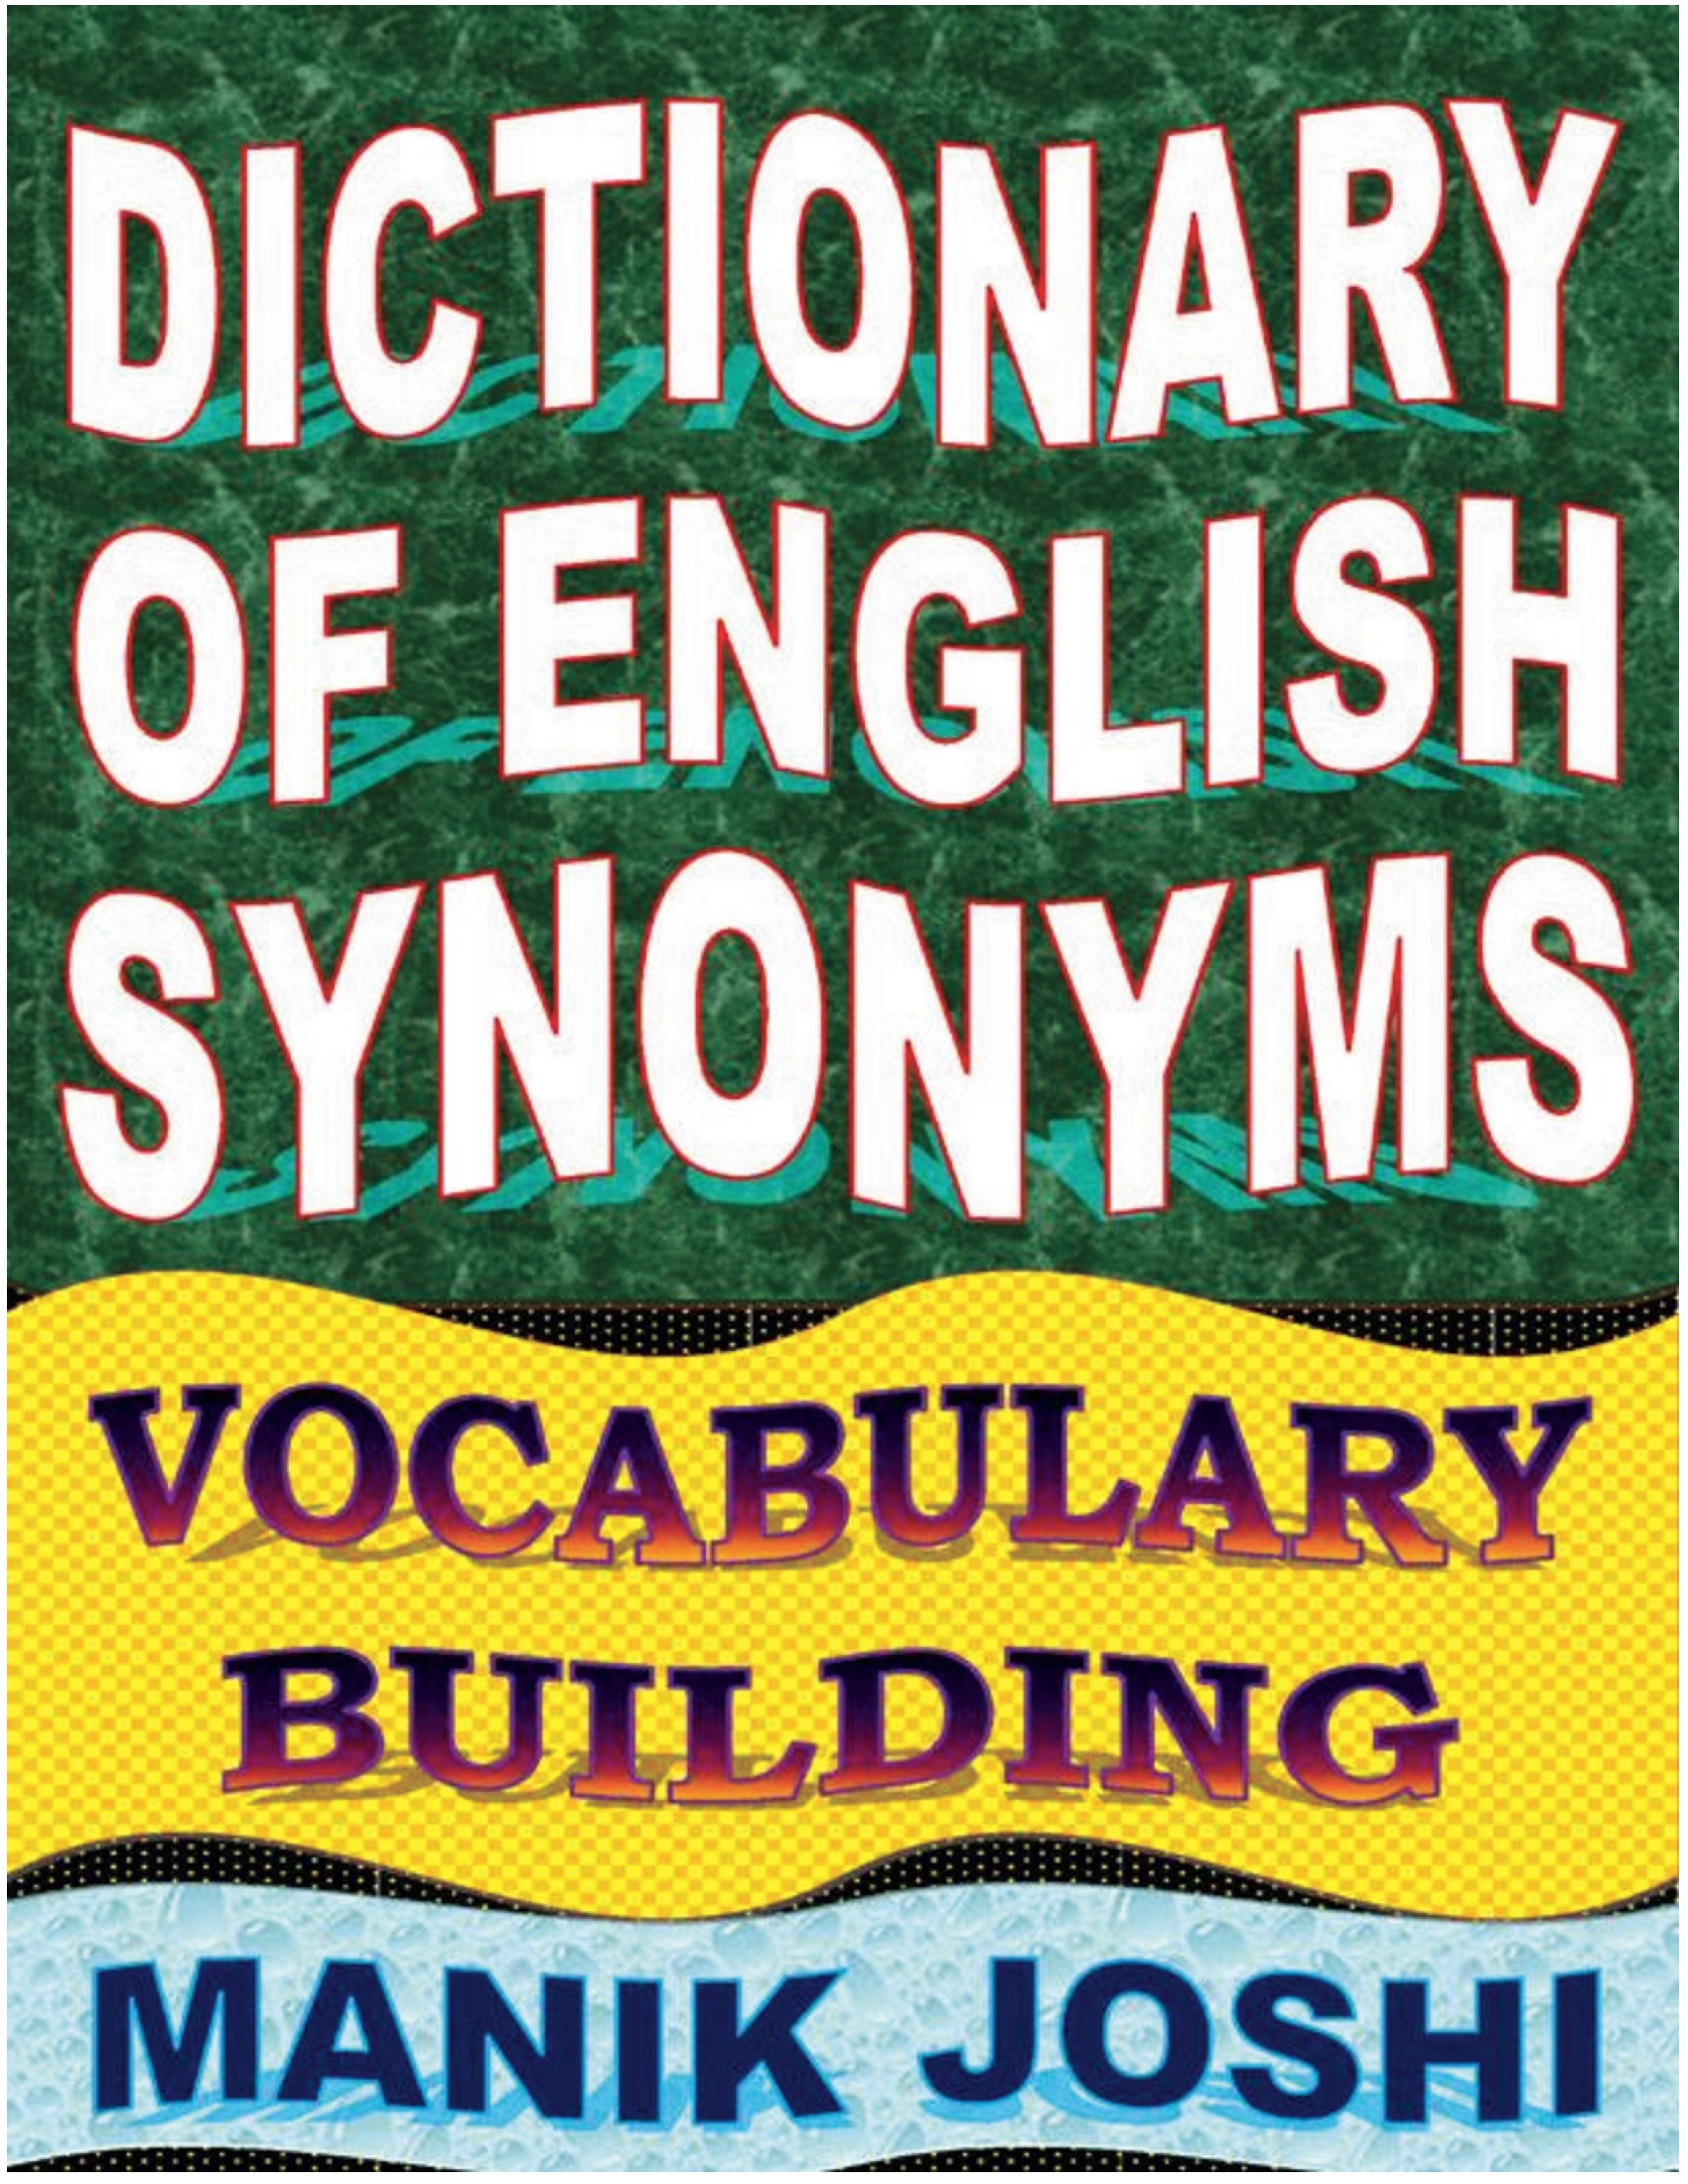 educational books synonyms